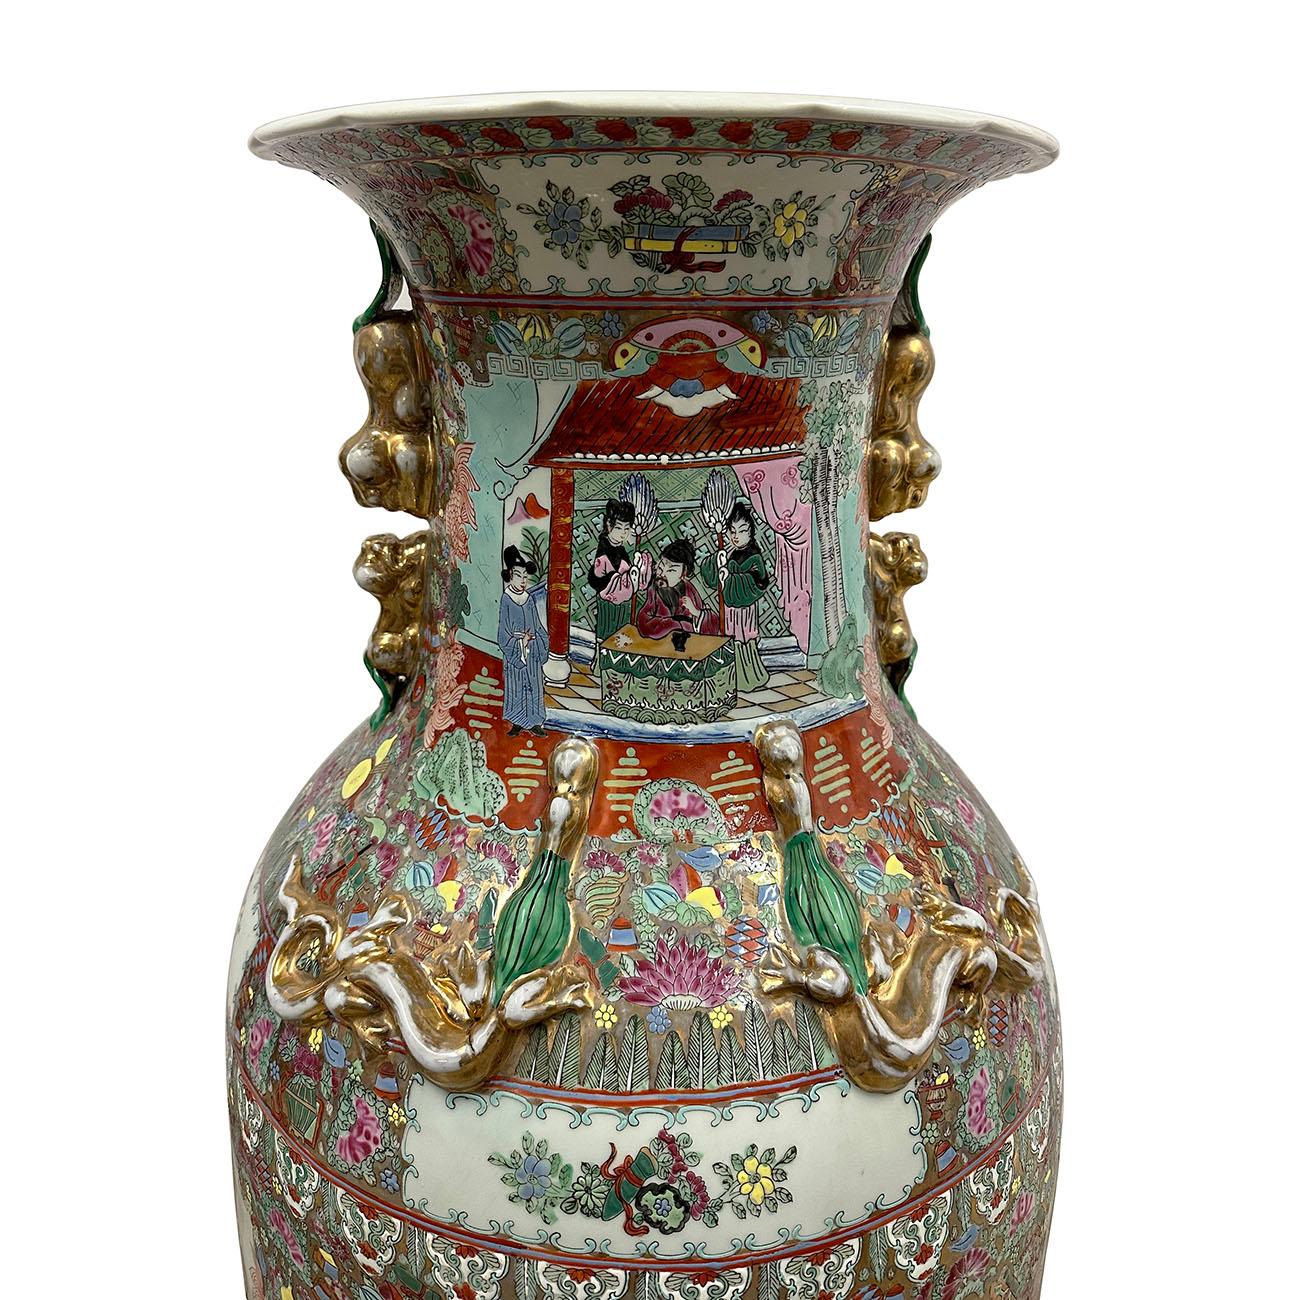 This magnificent Chinese Rose Medallion Tall vases also know as 